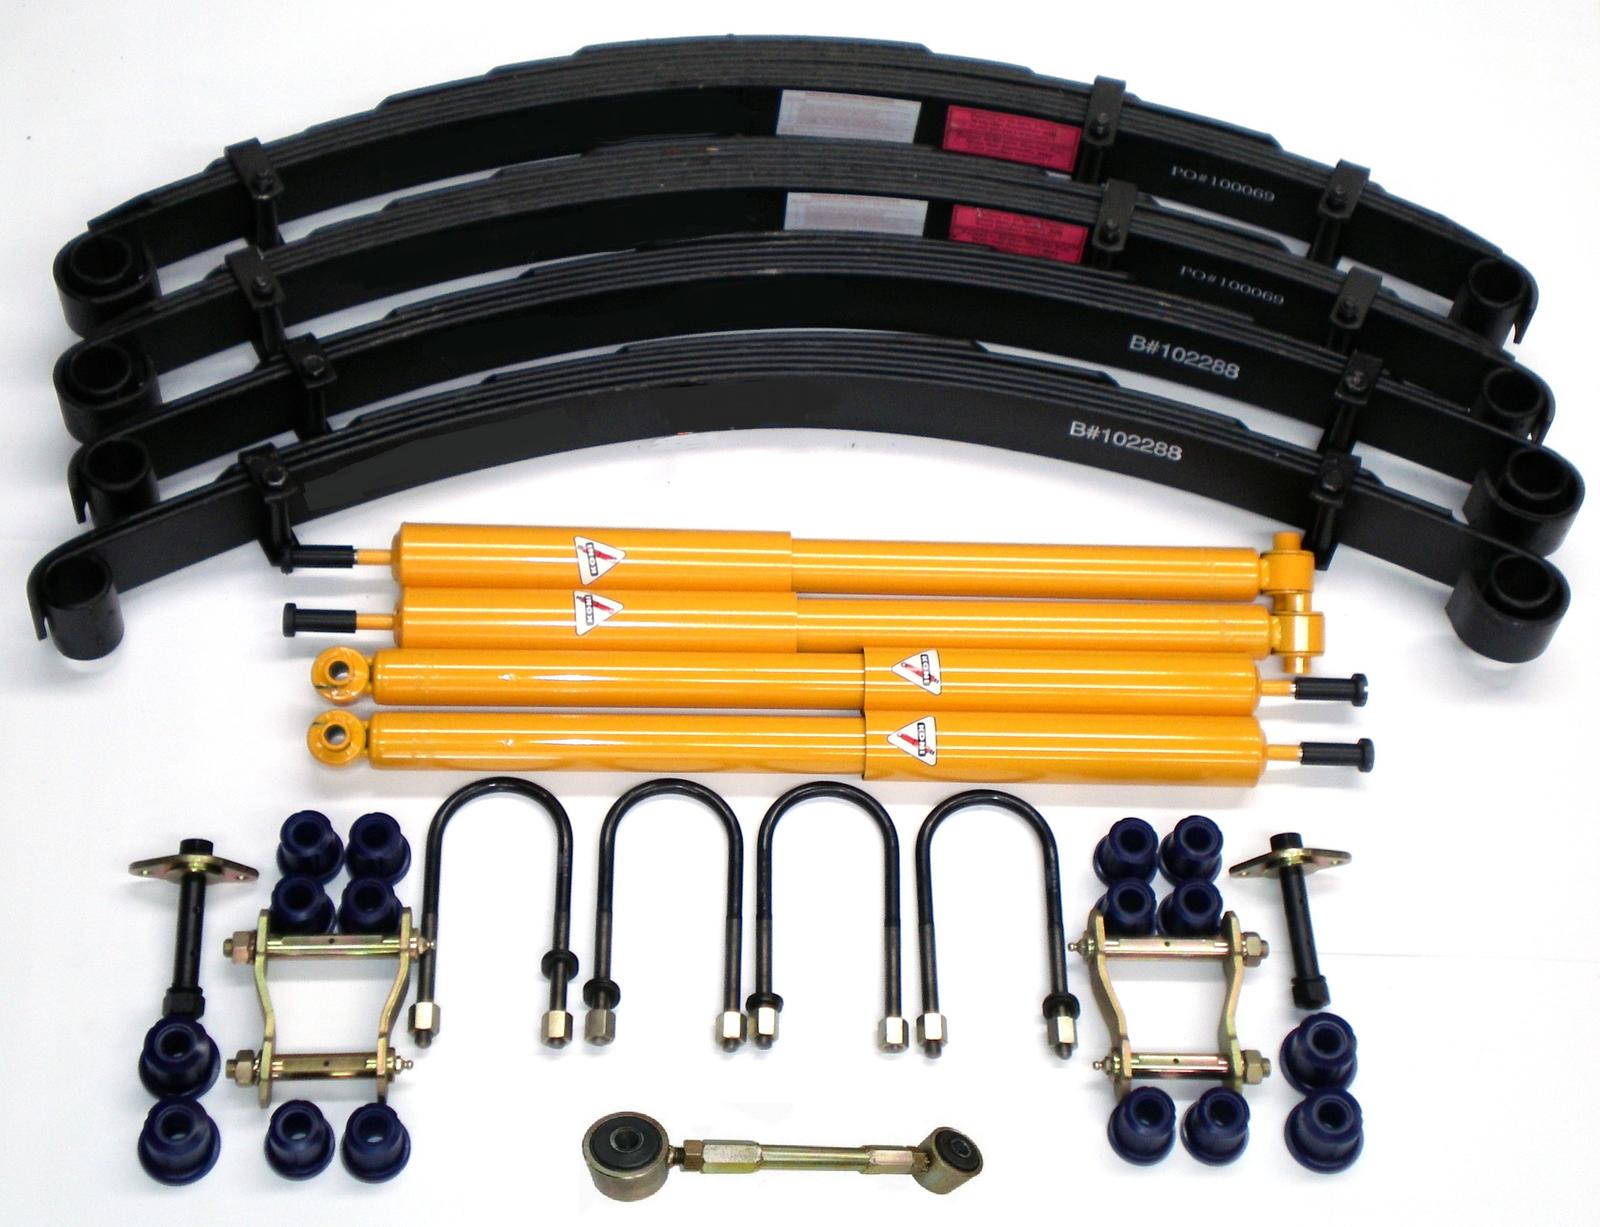 2 Inch 50mm Koni 4x4 Lift Kit Petrol & Diesel up to 35kg Front Load to suit Toyota Hilux 1983-1996